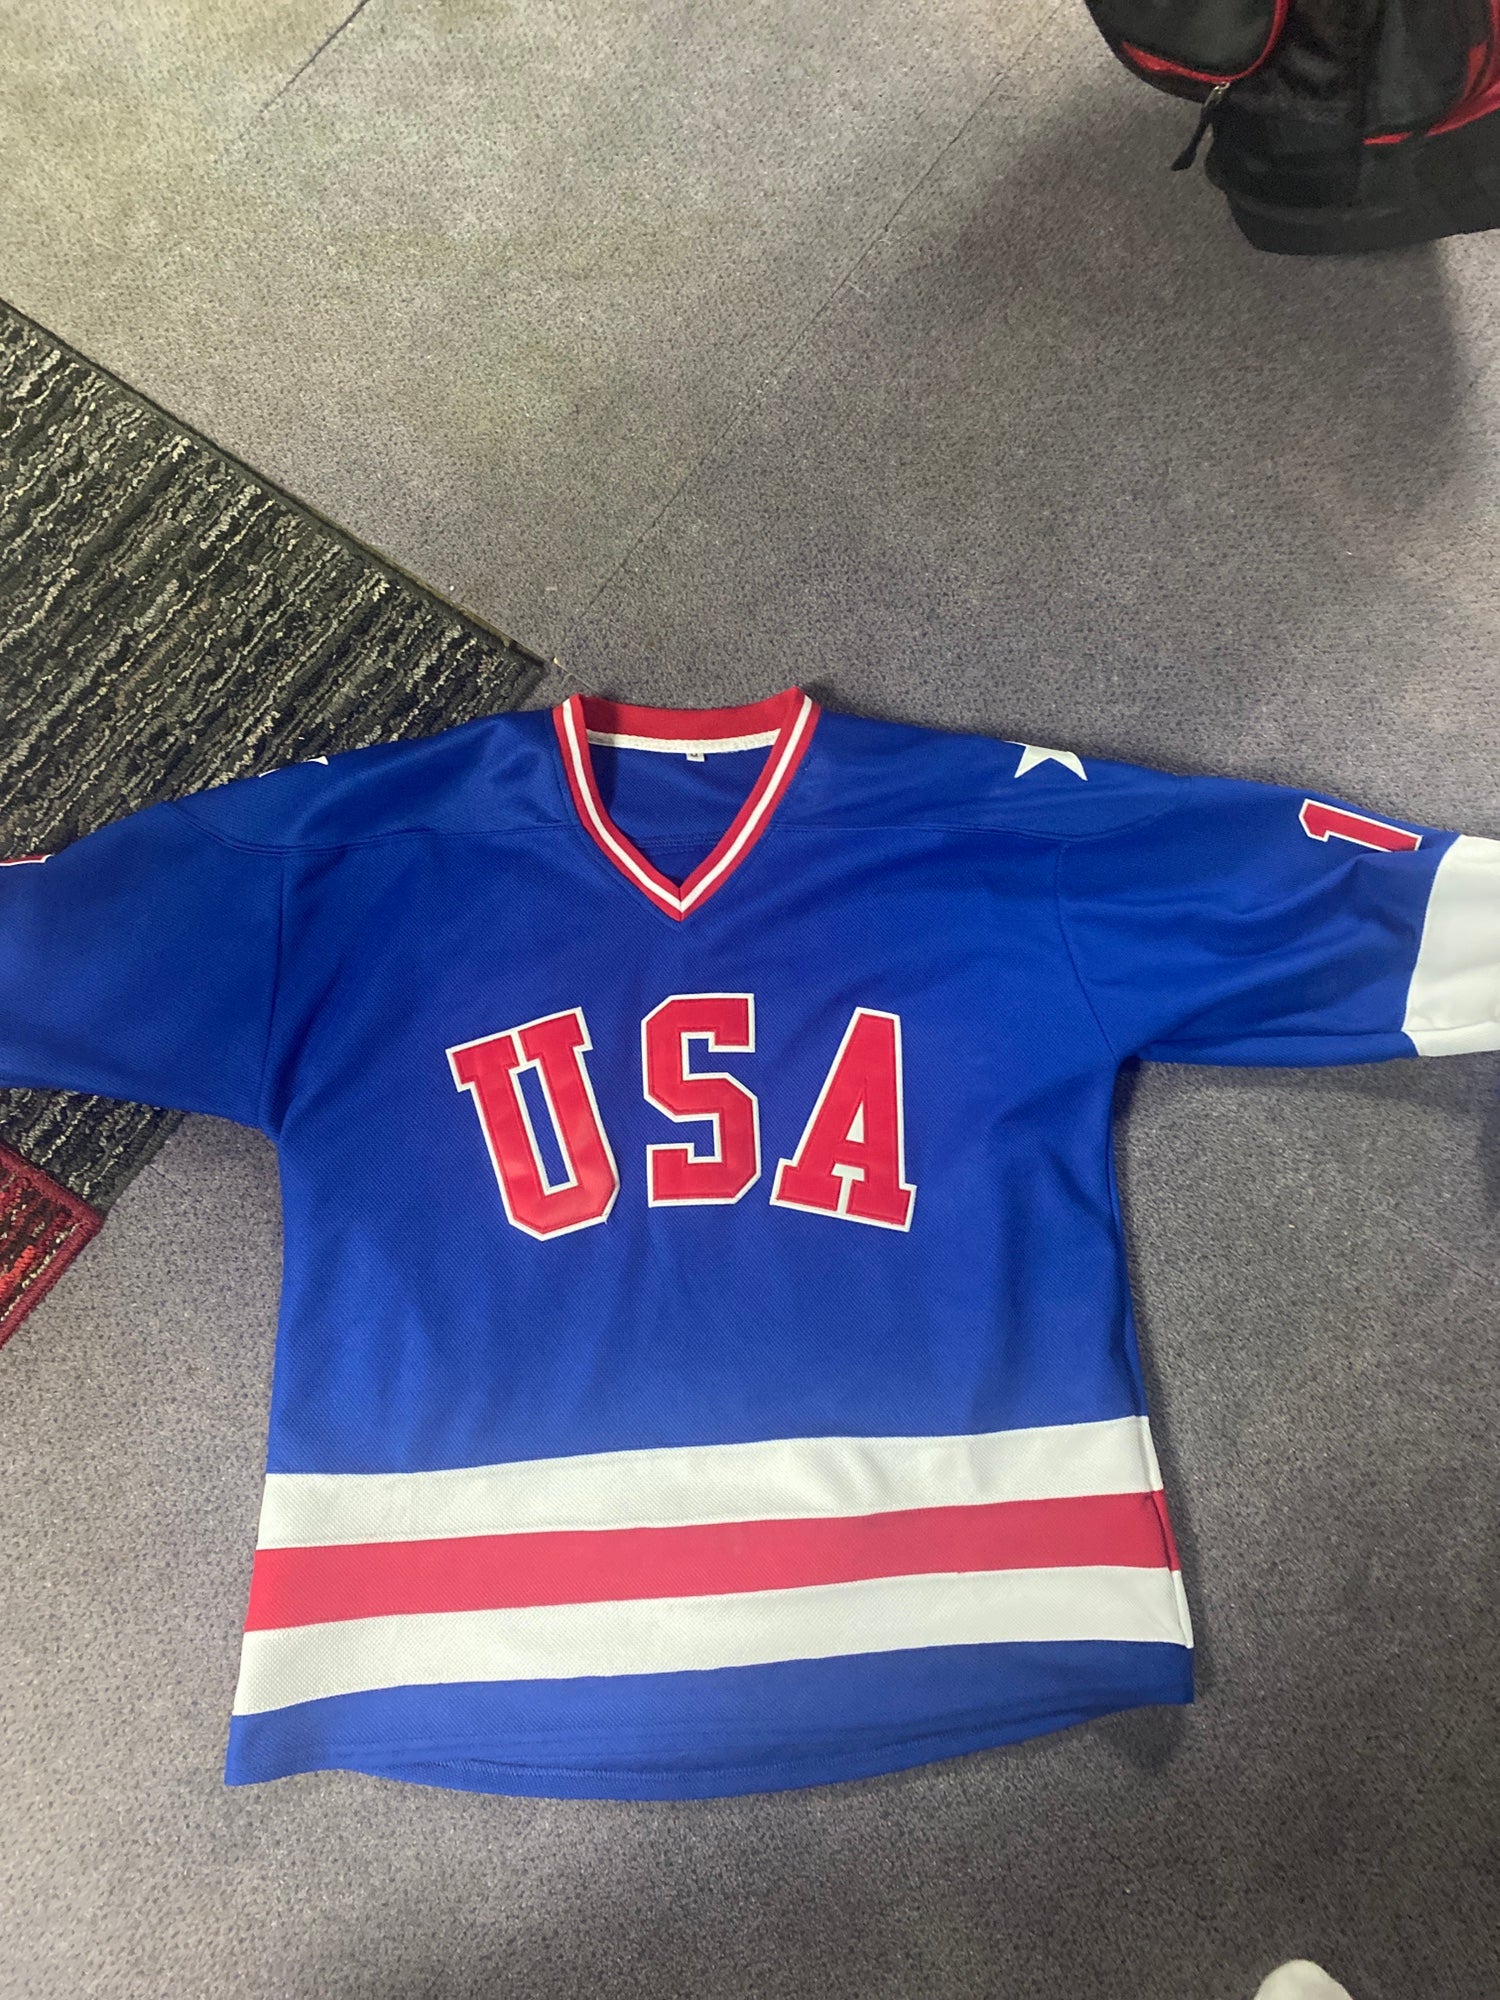 #21 Mike Eruzione 1980 Miracle On Ice USA Hockey Jersey WHITE and Blue S-2XL